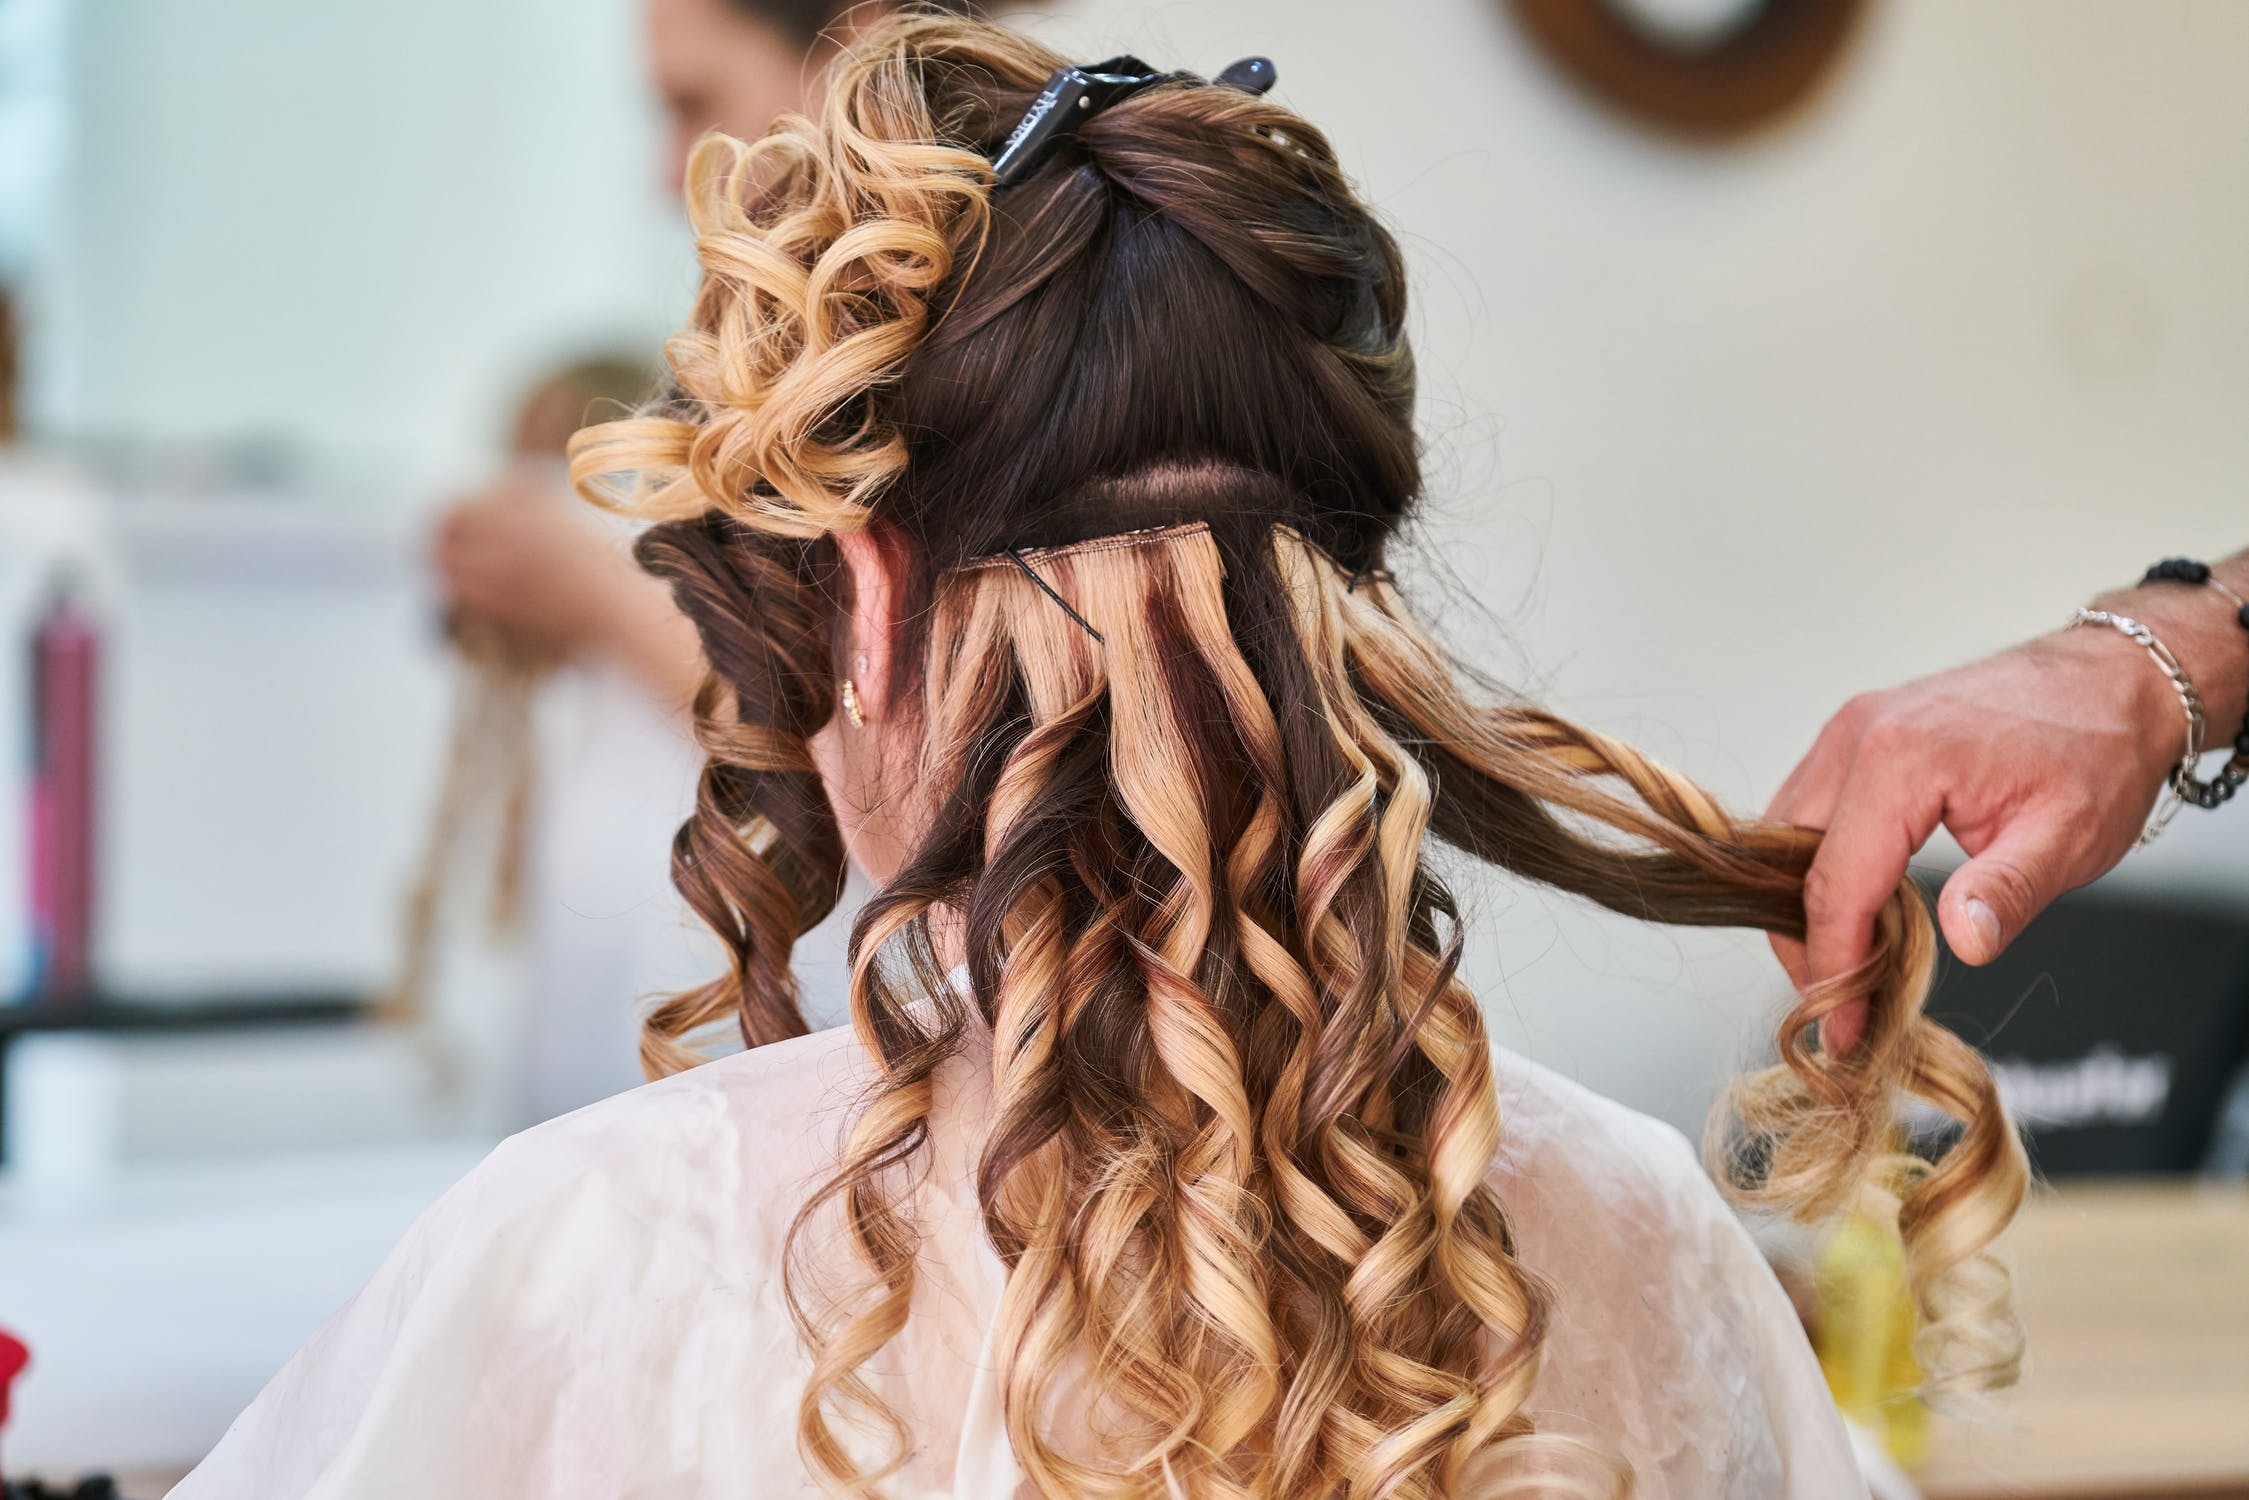 Styling a model's hair | Source: Pexels